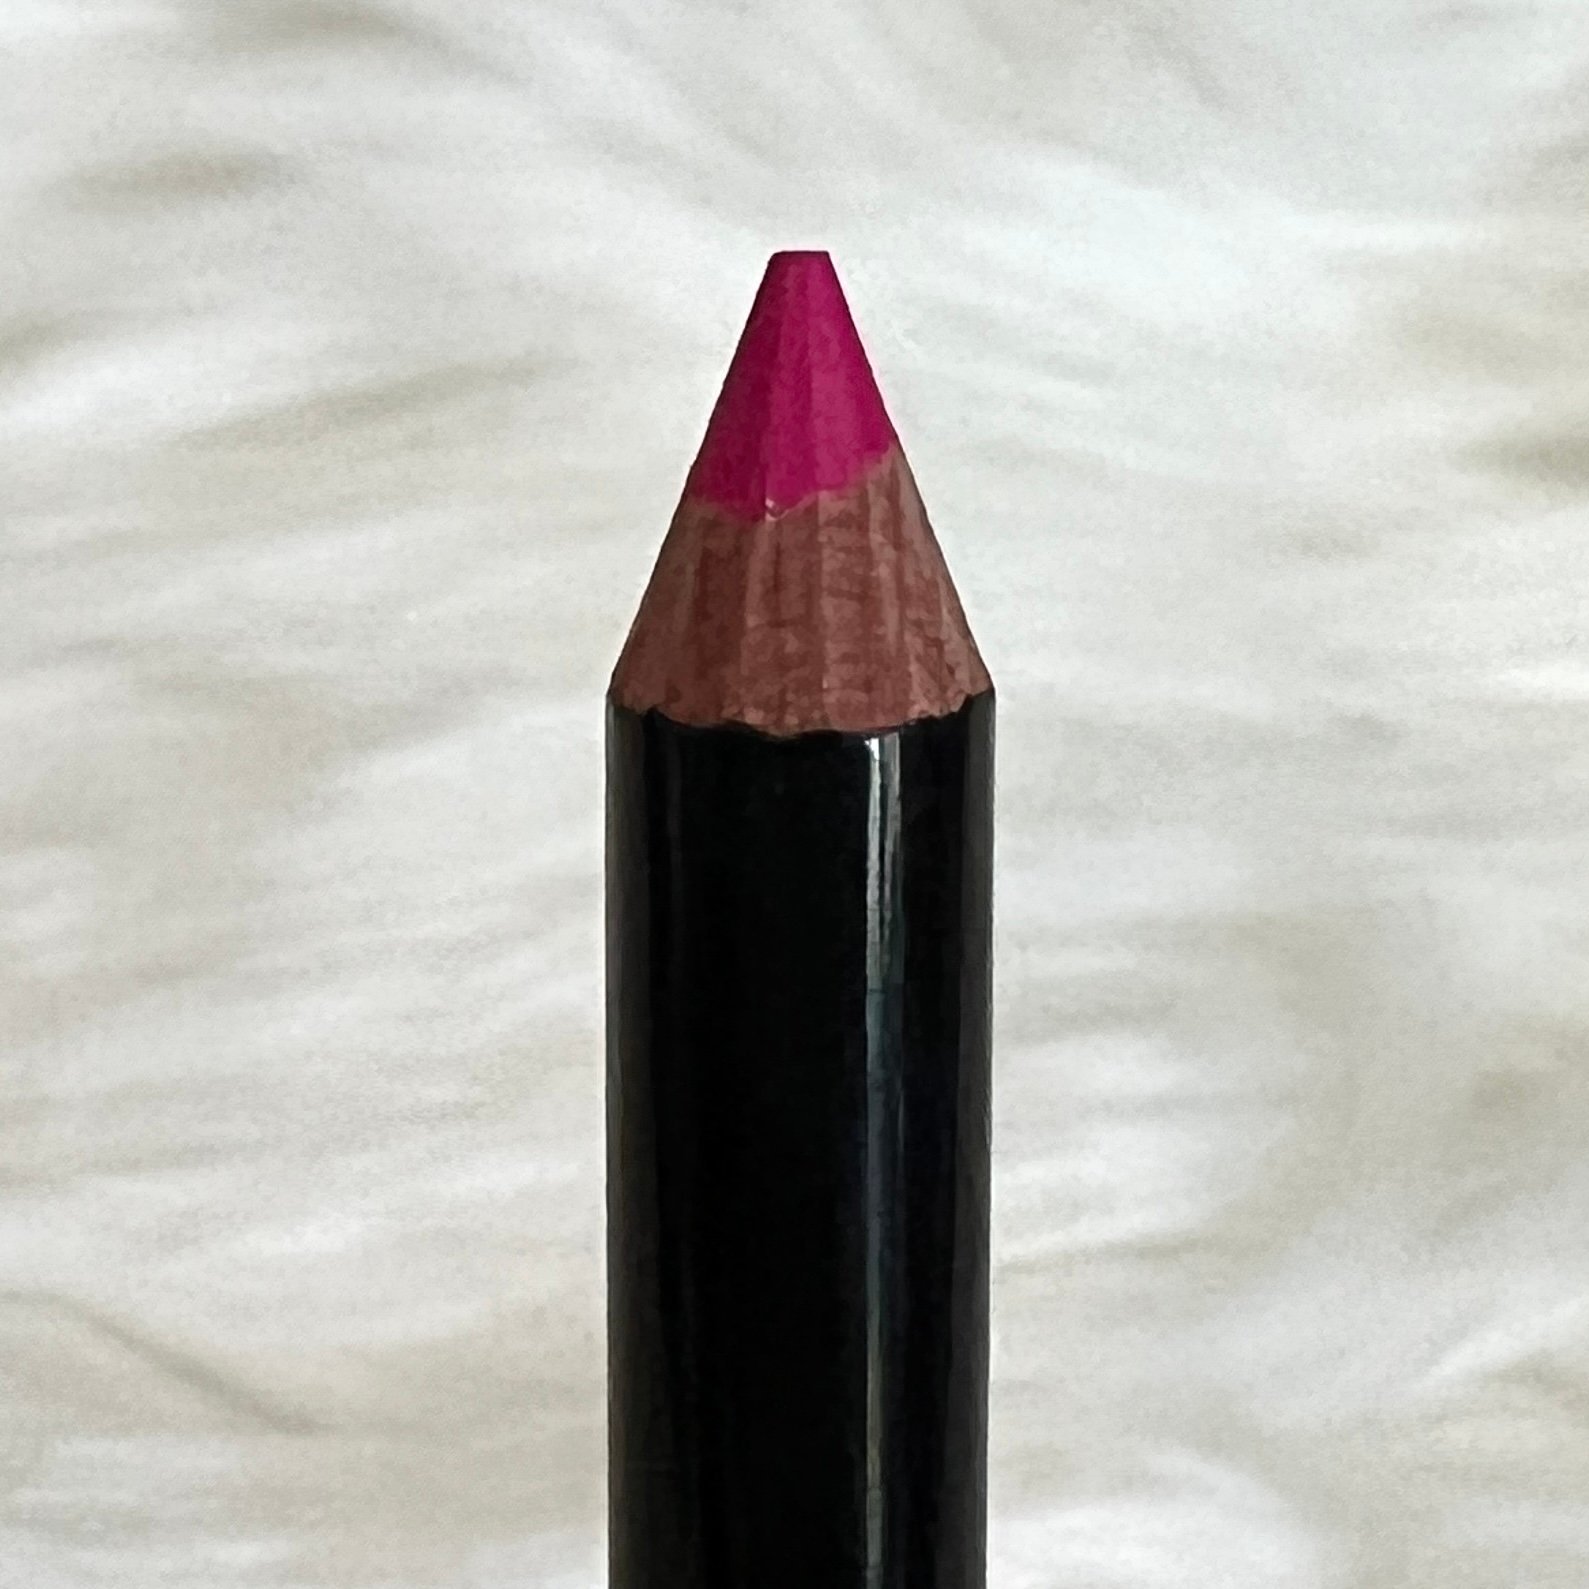 Tip of Lip Liner for The Beauty Box by Bombay and Cedar July 2022